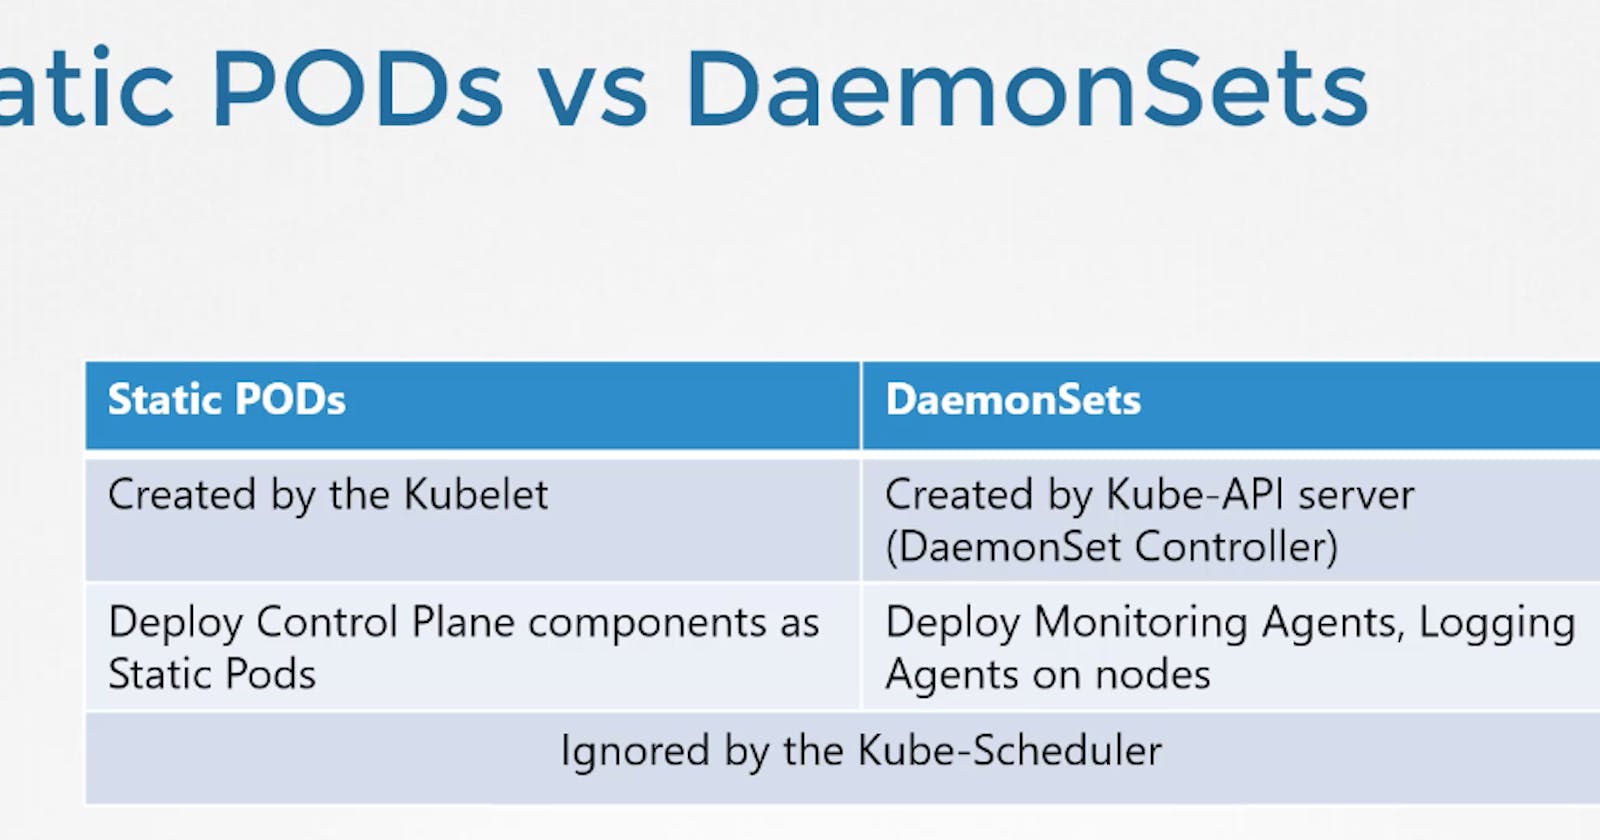 Differences between Daemon sets and Static pods